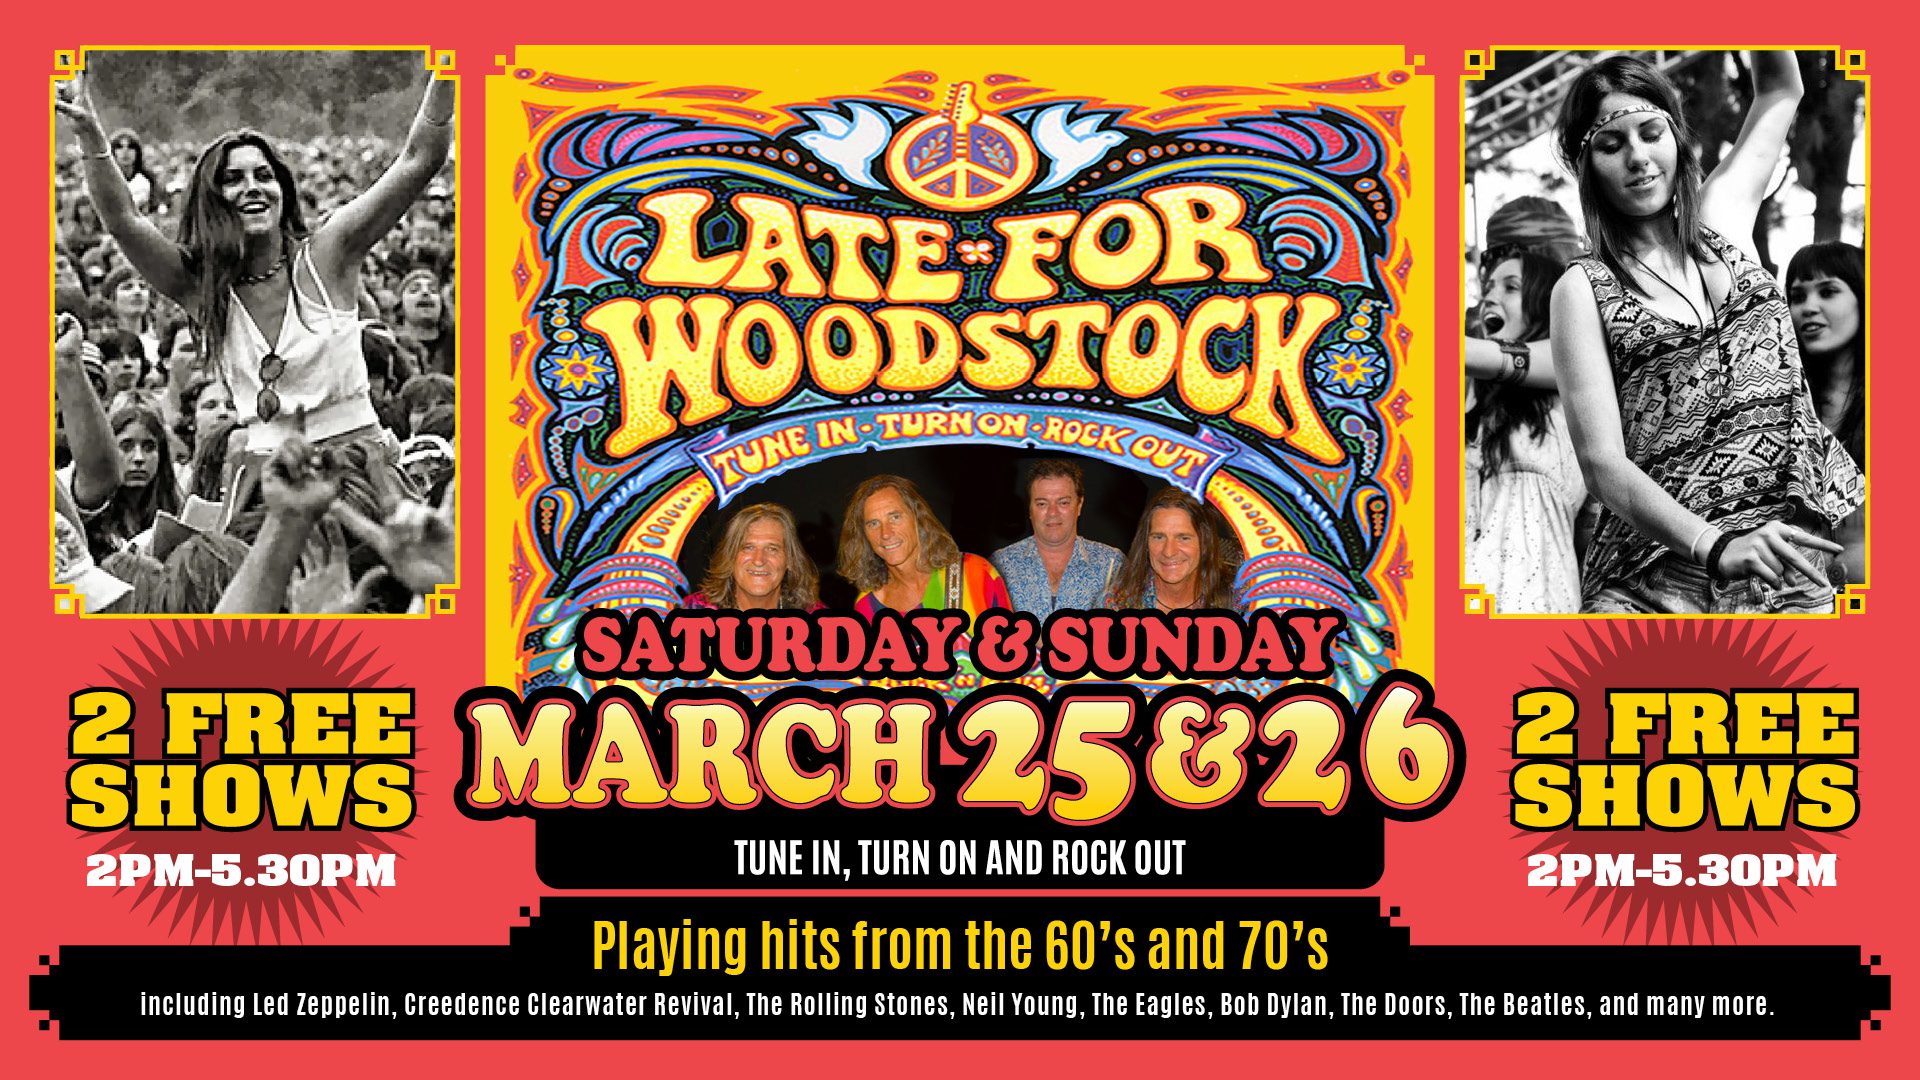 Event Poster for Late For Woodstock @ Airlie Beach Hotel | EventsontheHorizon.com